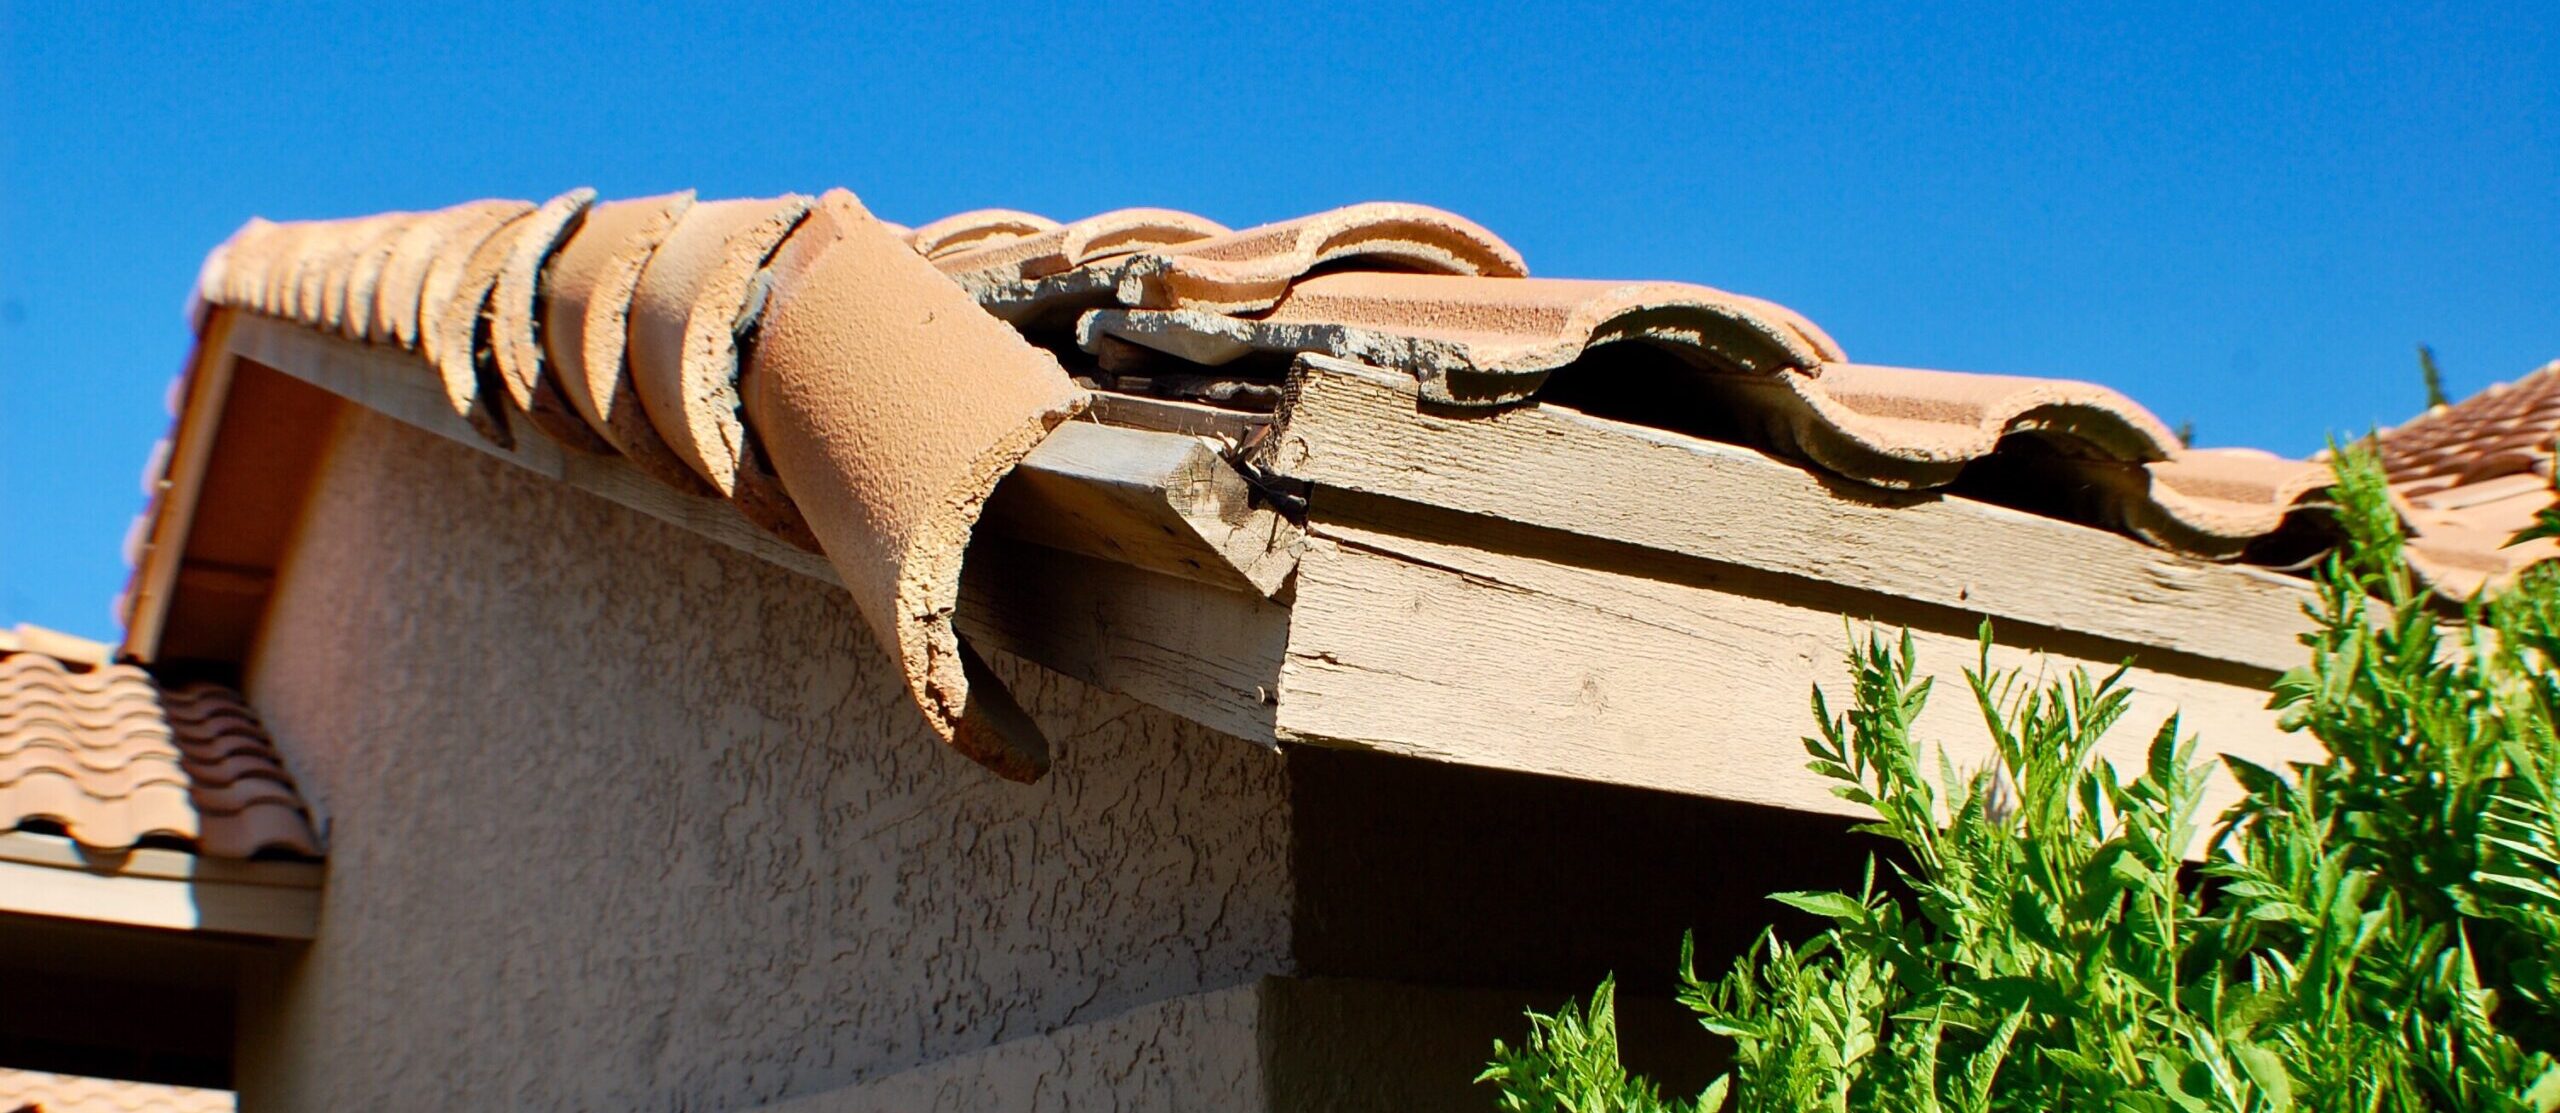 fall maintenance projects could include broken roof tiles, pictured here